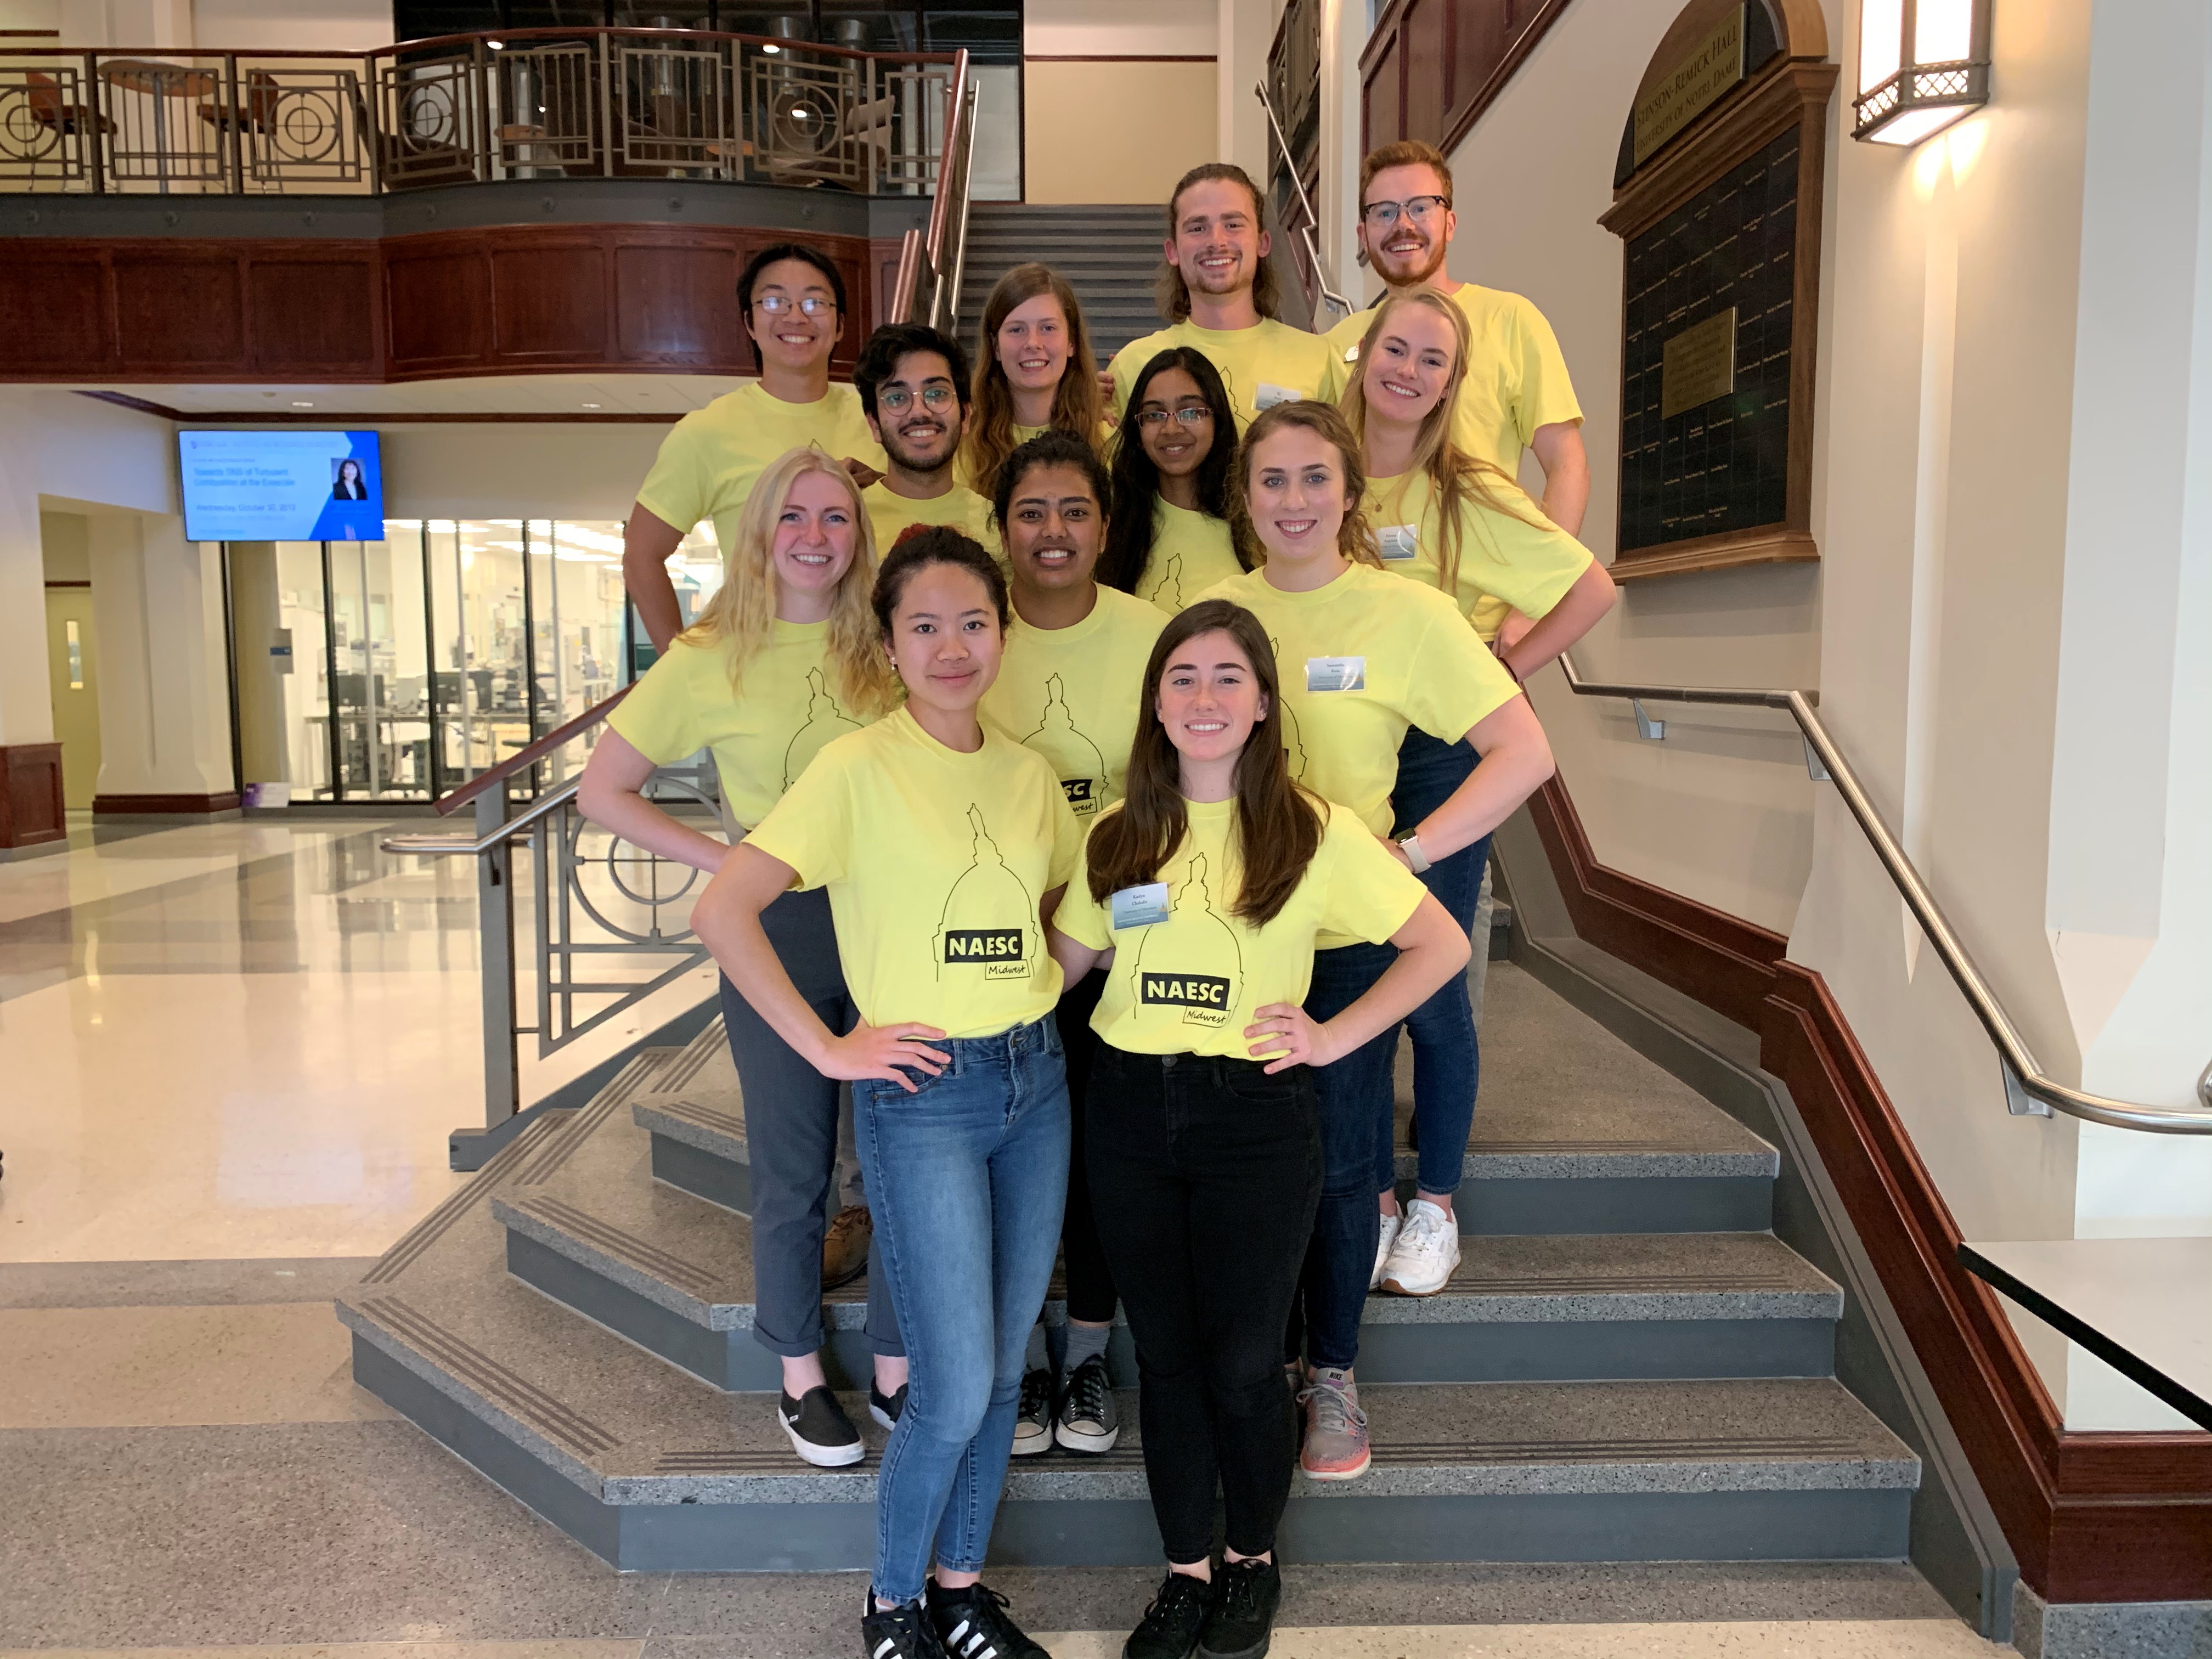 SESB's Leadership Team at the 2019 Regional Conference at Notre Dame